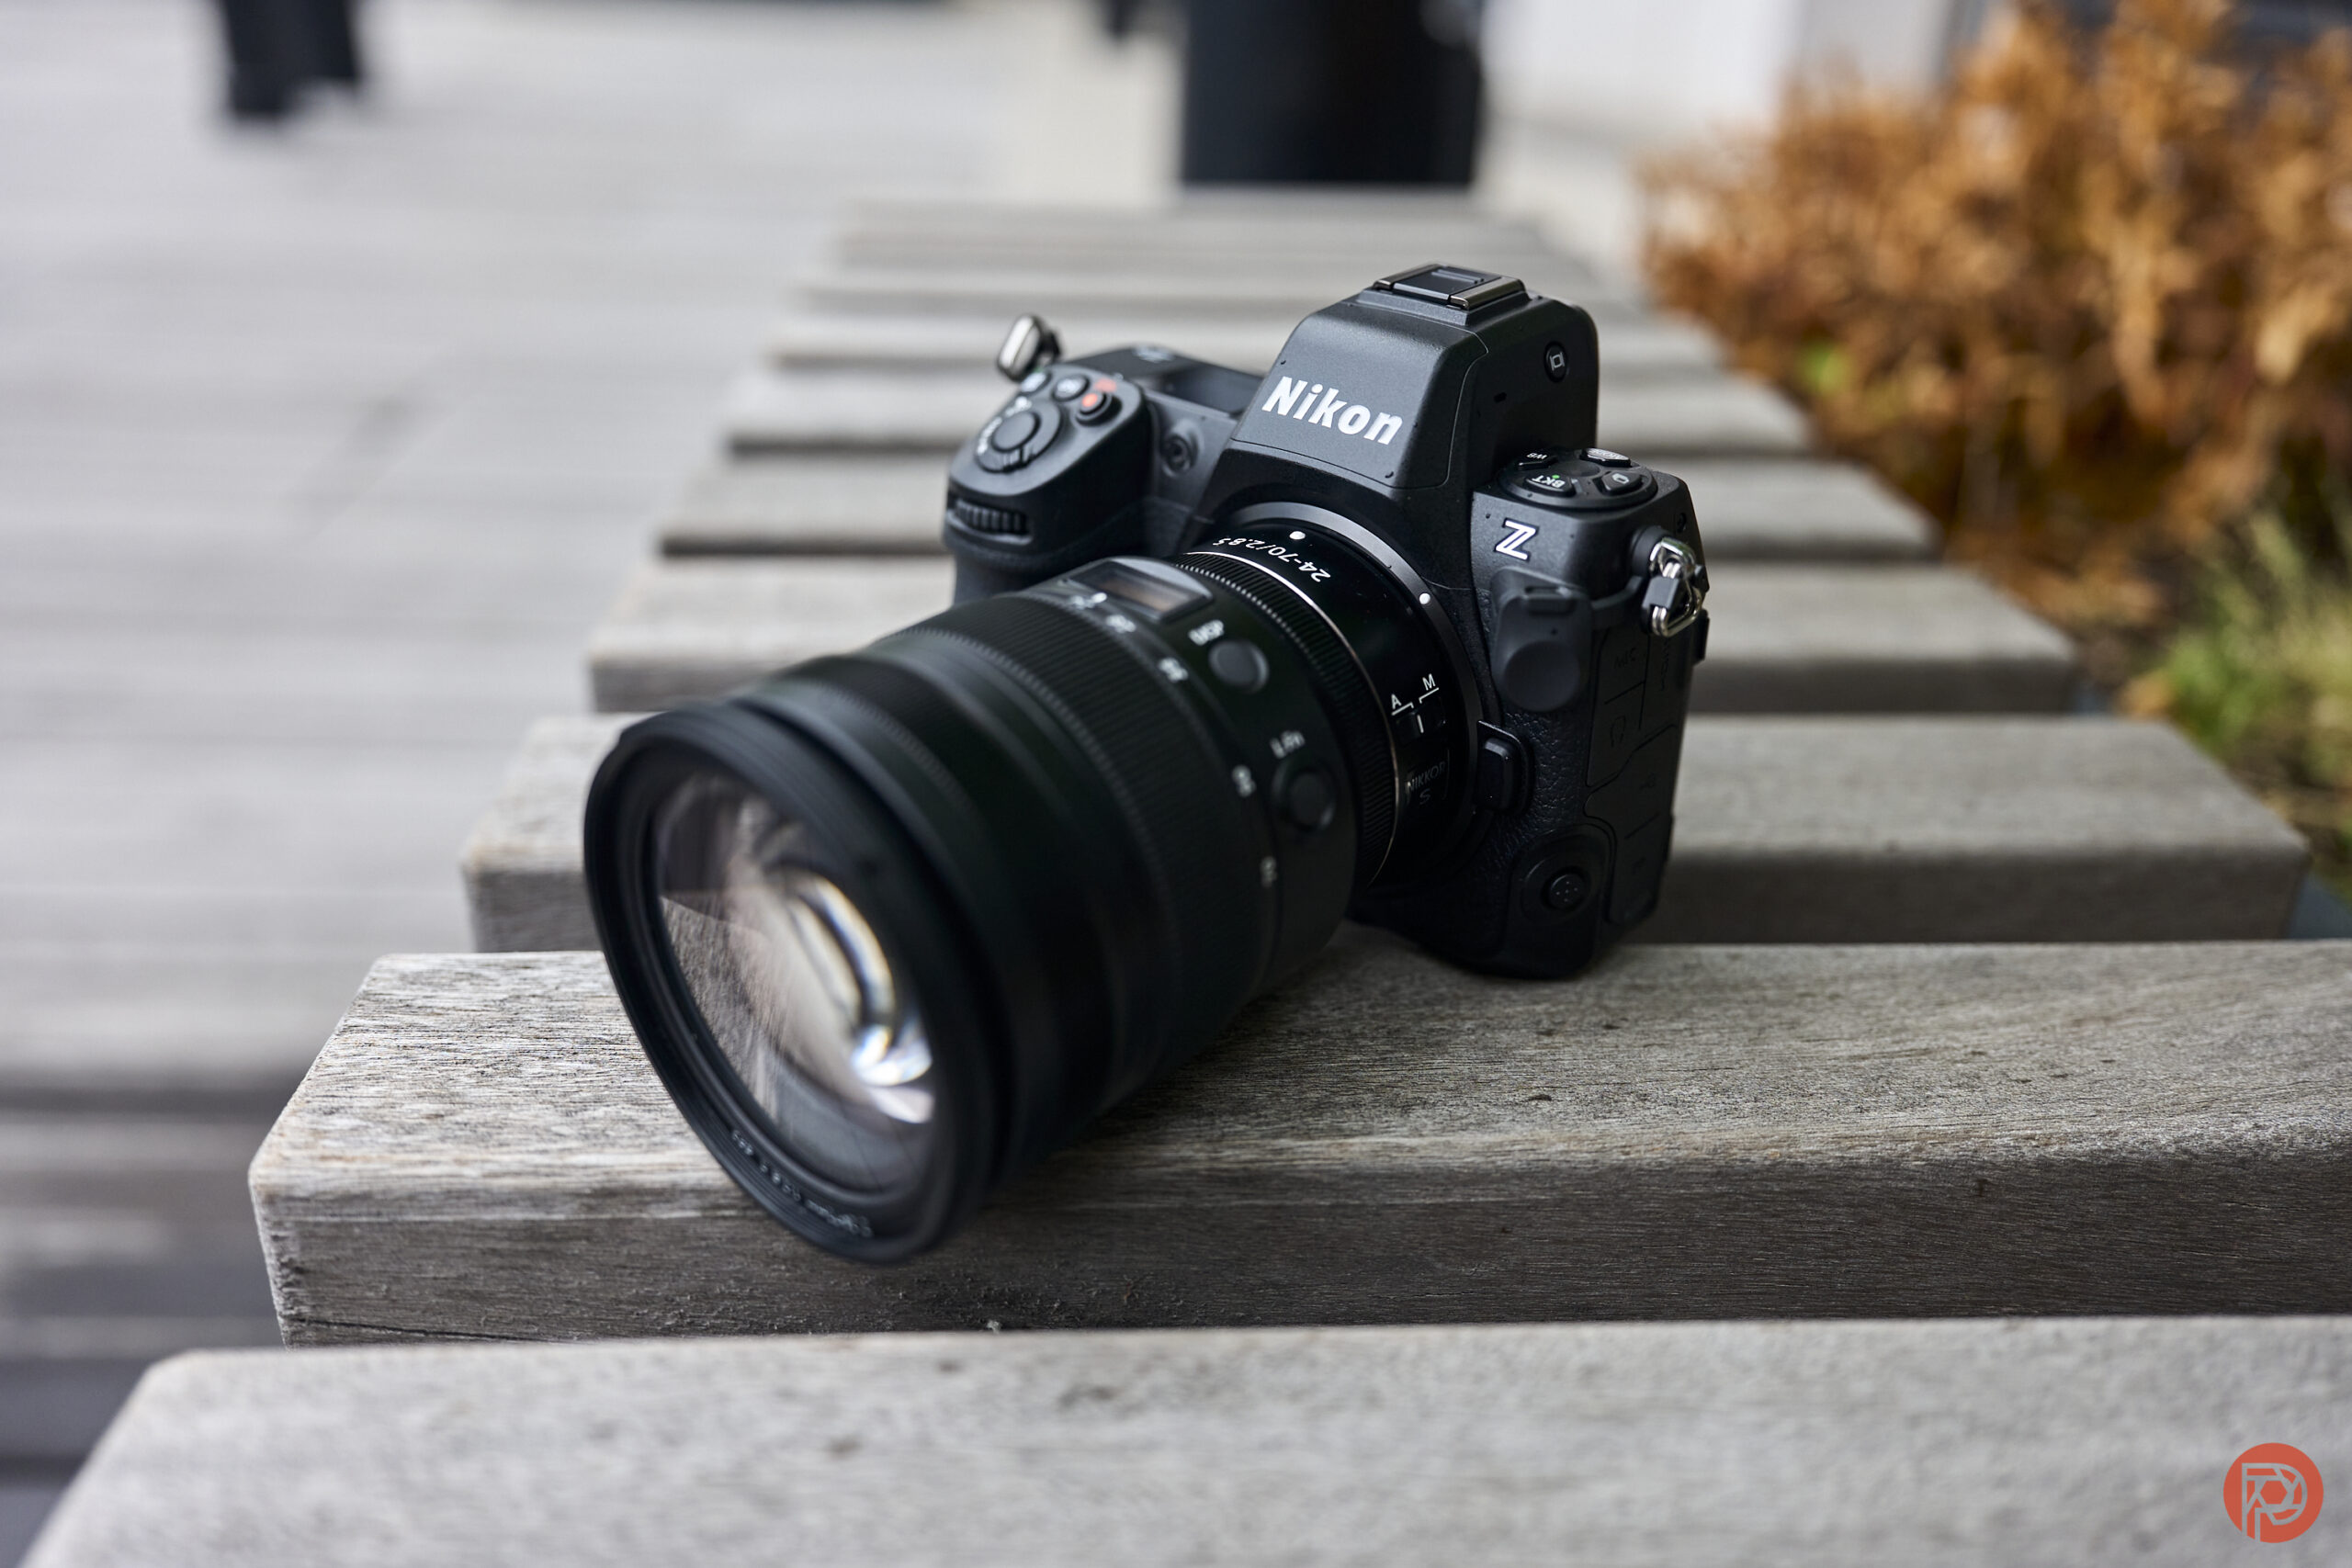 Nikon z8 Review: The One We've Been Waiting For